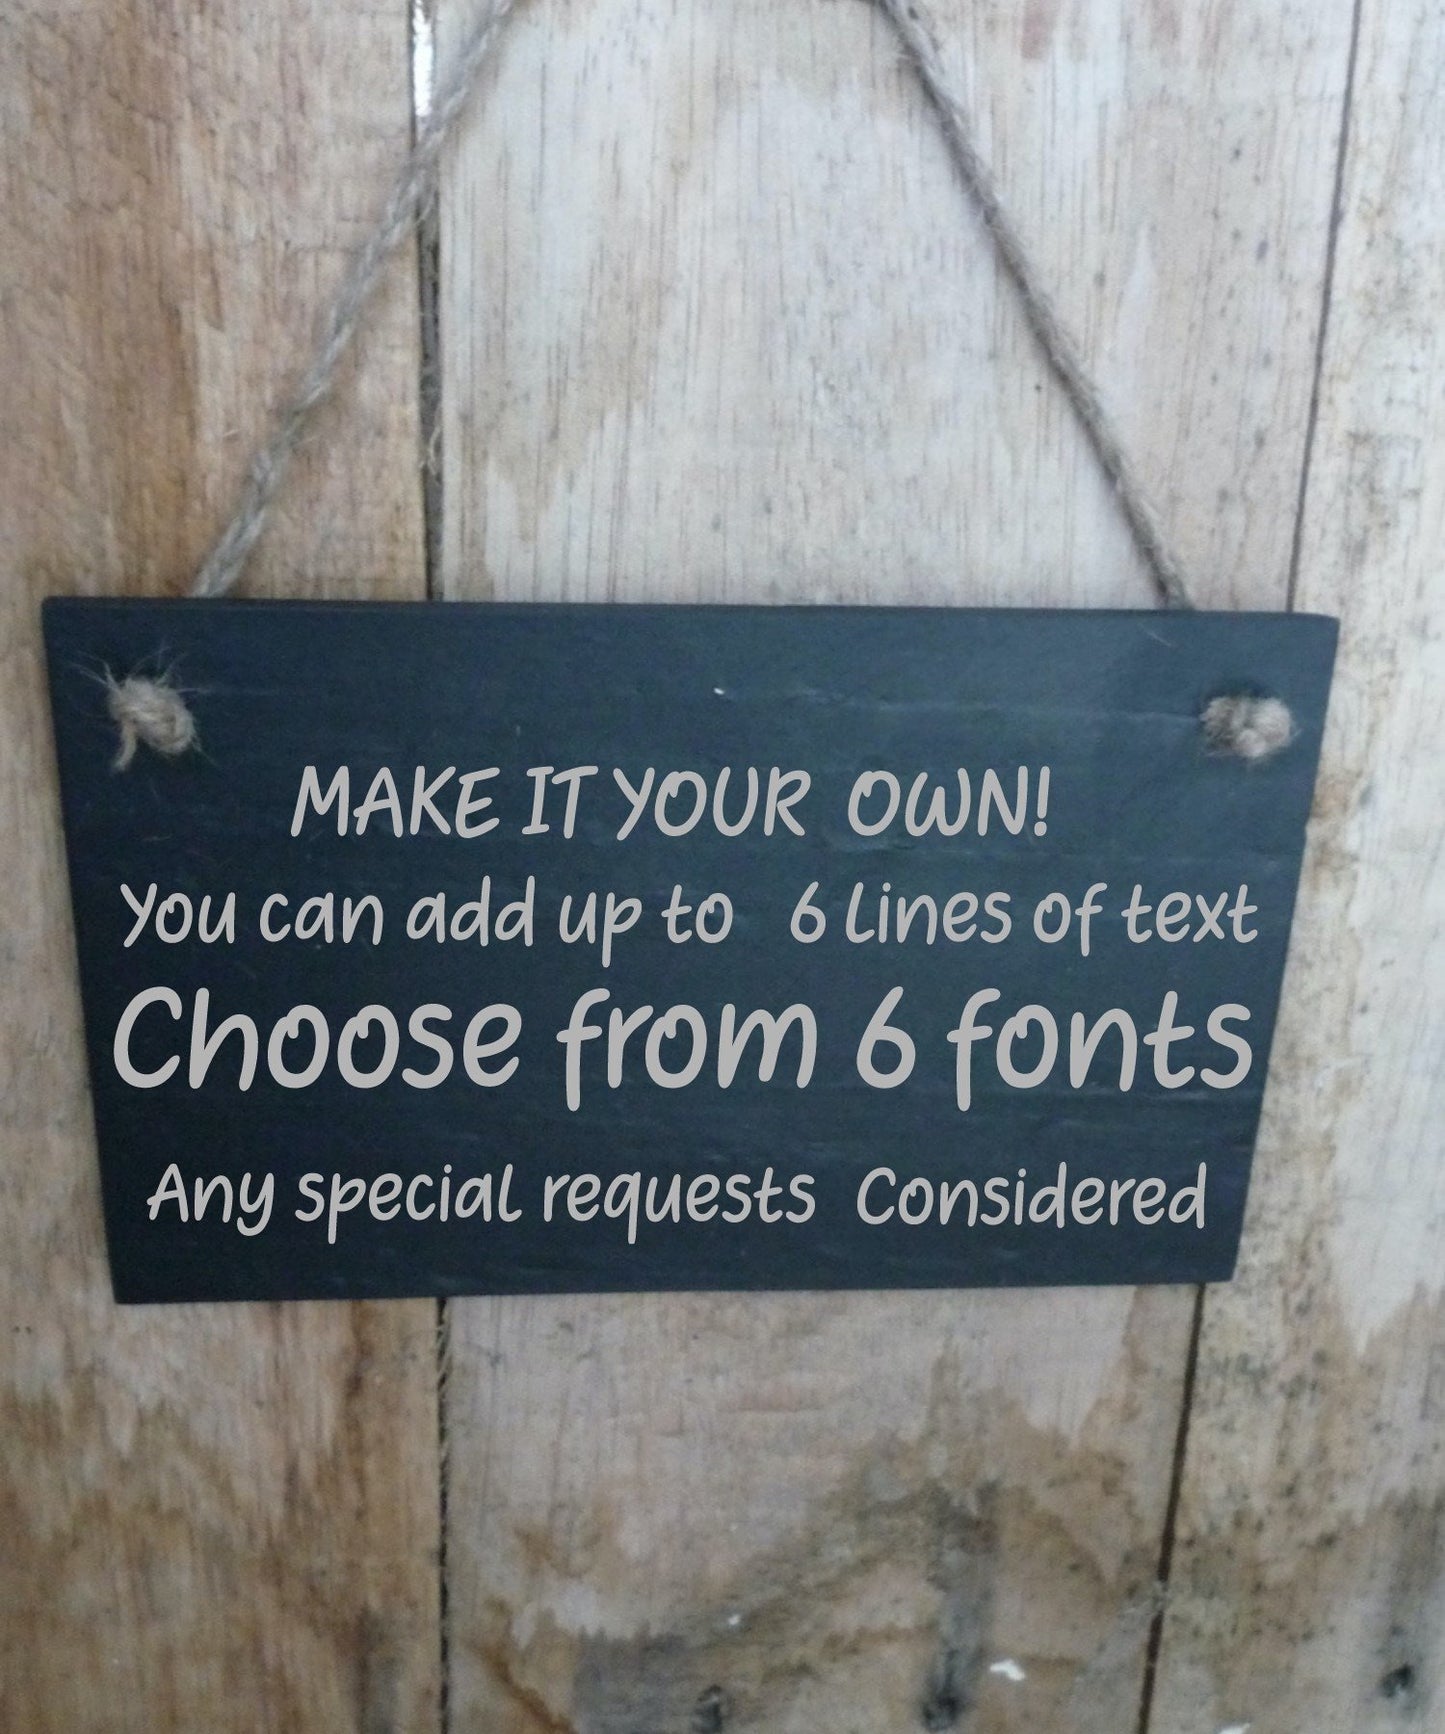 Customise your own 180mm wide x 120mm tall sign.